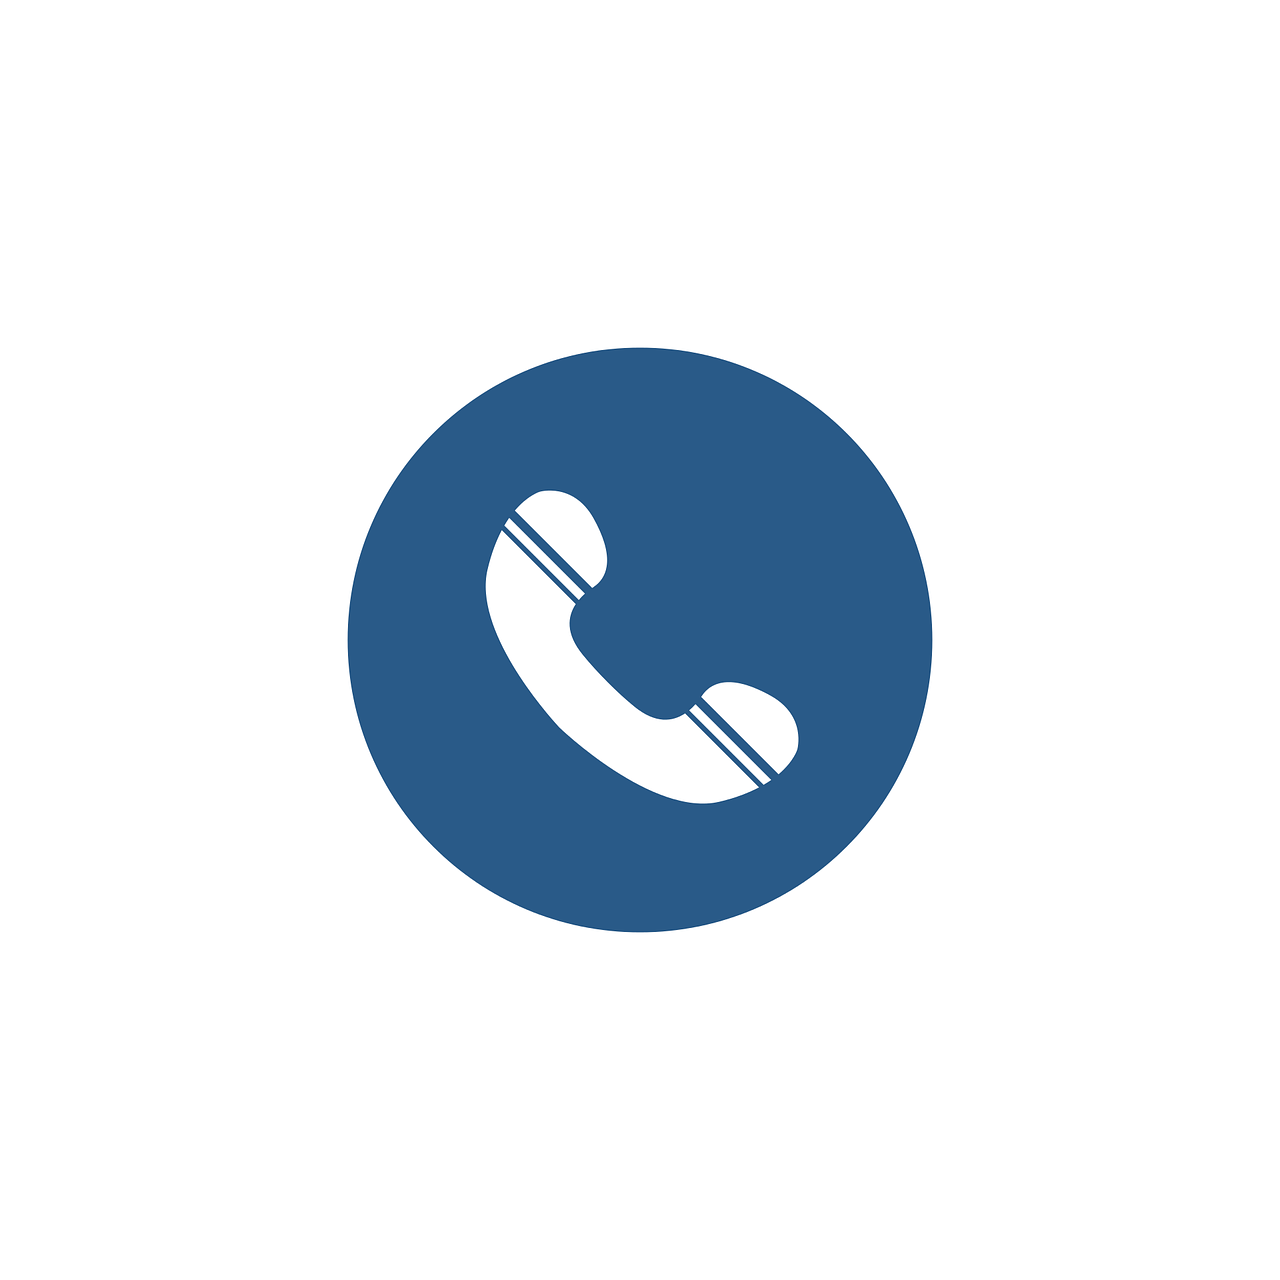 a phone sitting on top of a blue circle, a stock photo, minimalist logo vector art, support, in an call centre office, white background and fill